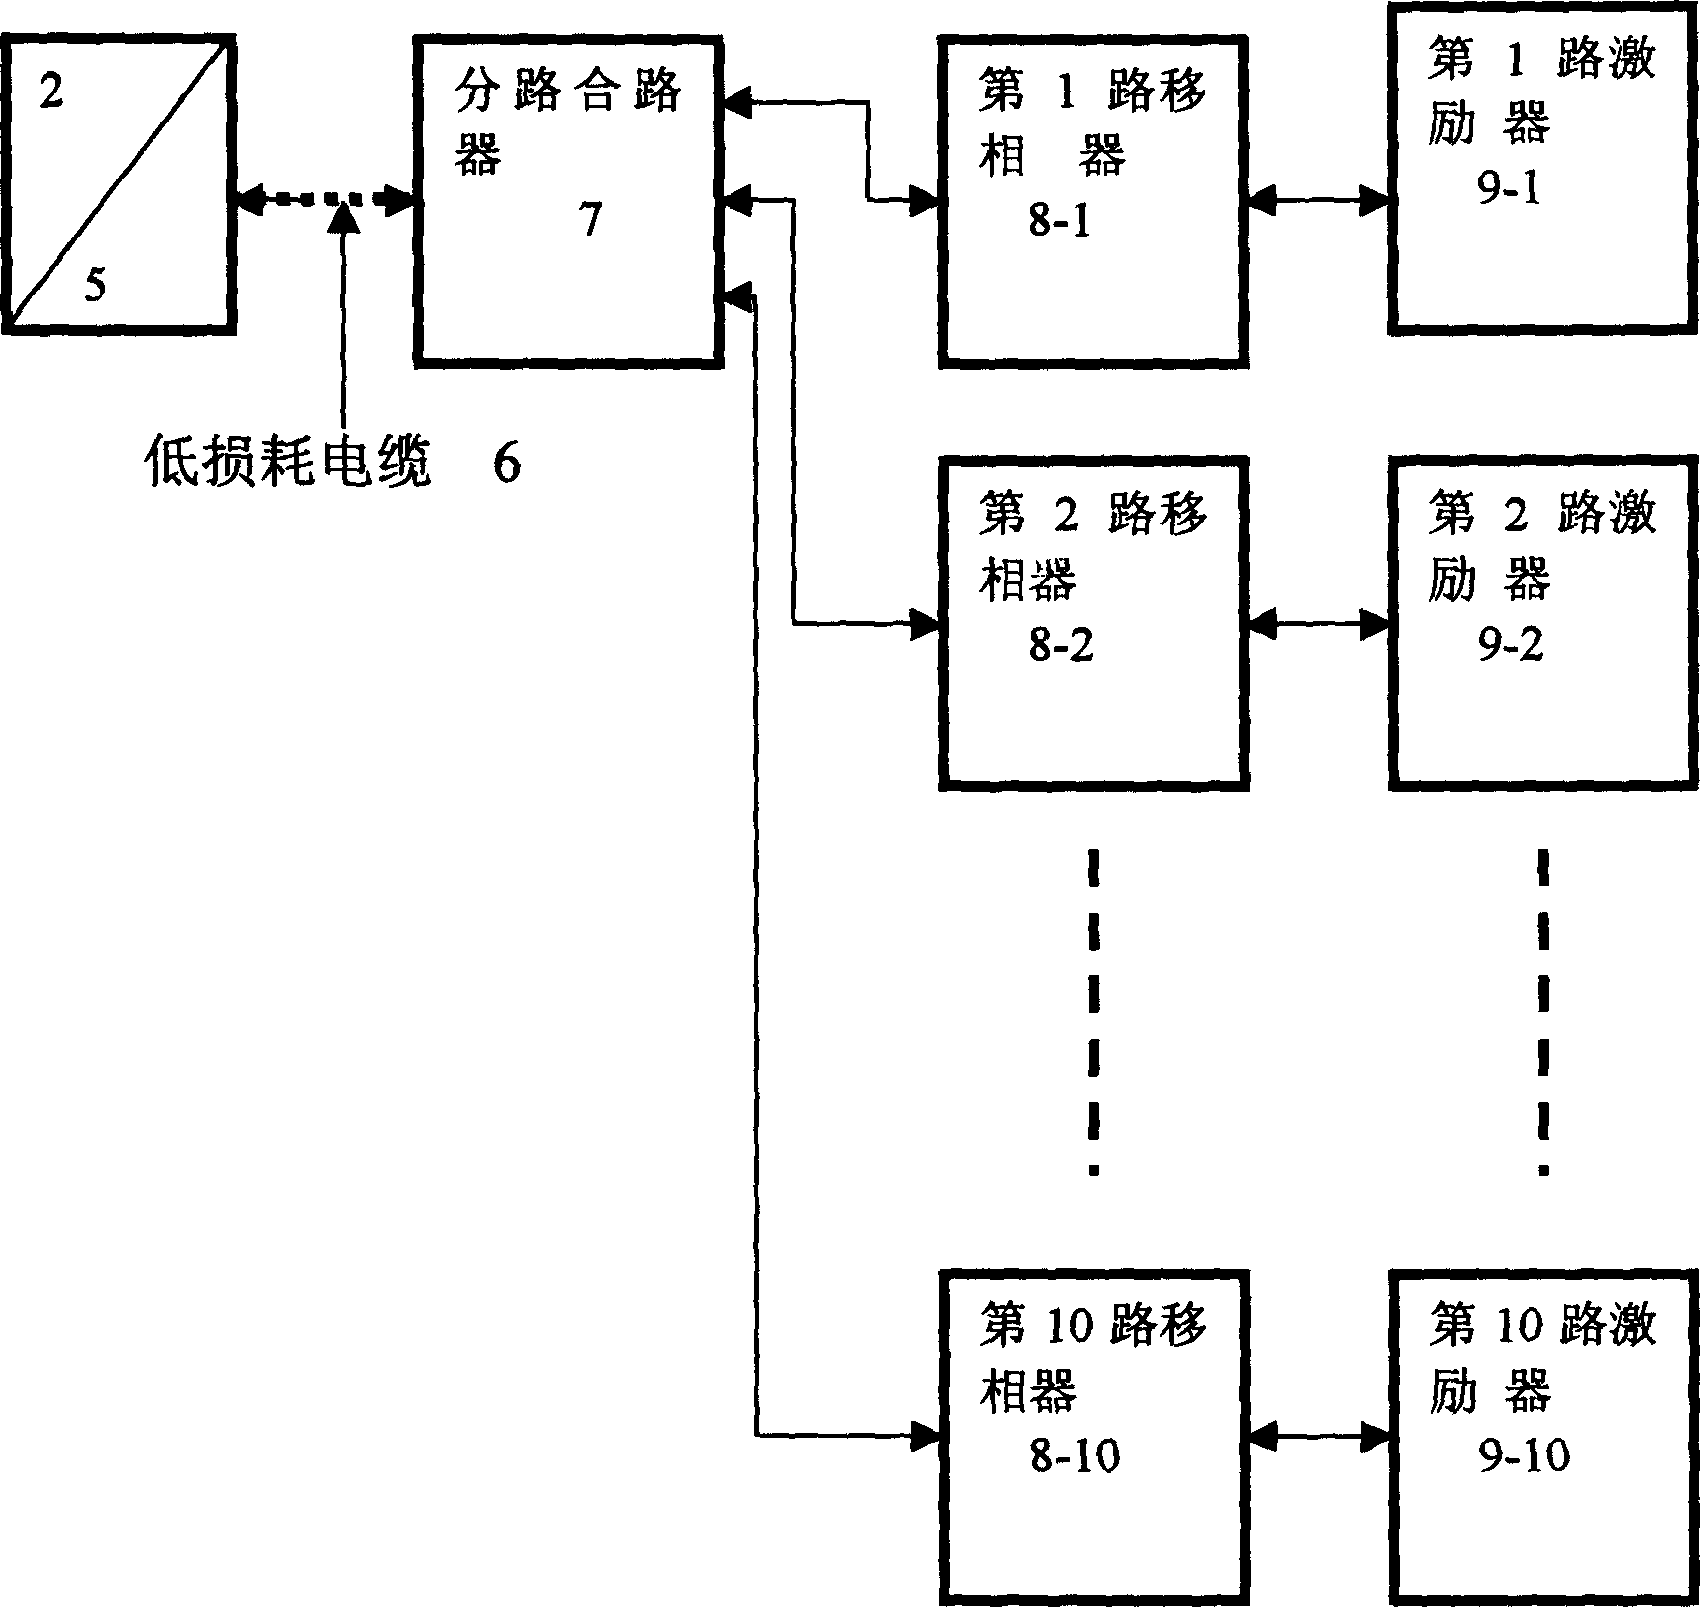 Underground space passive relay communication system